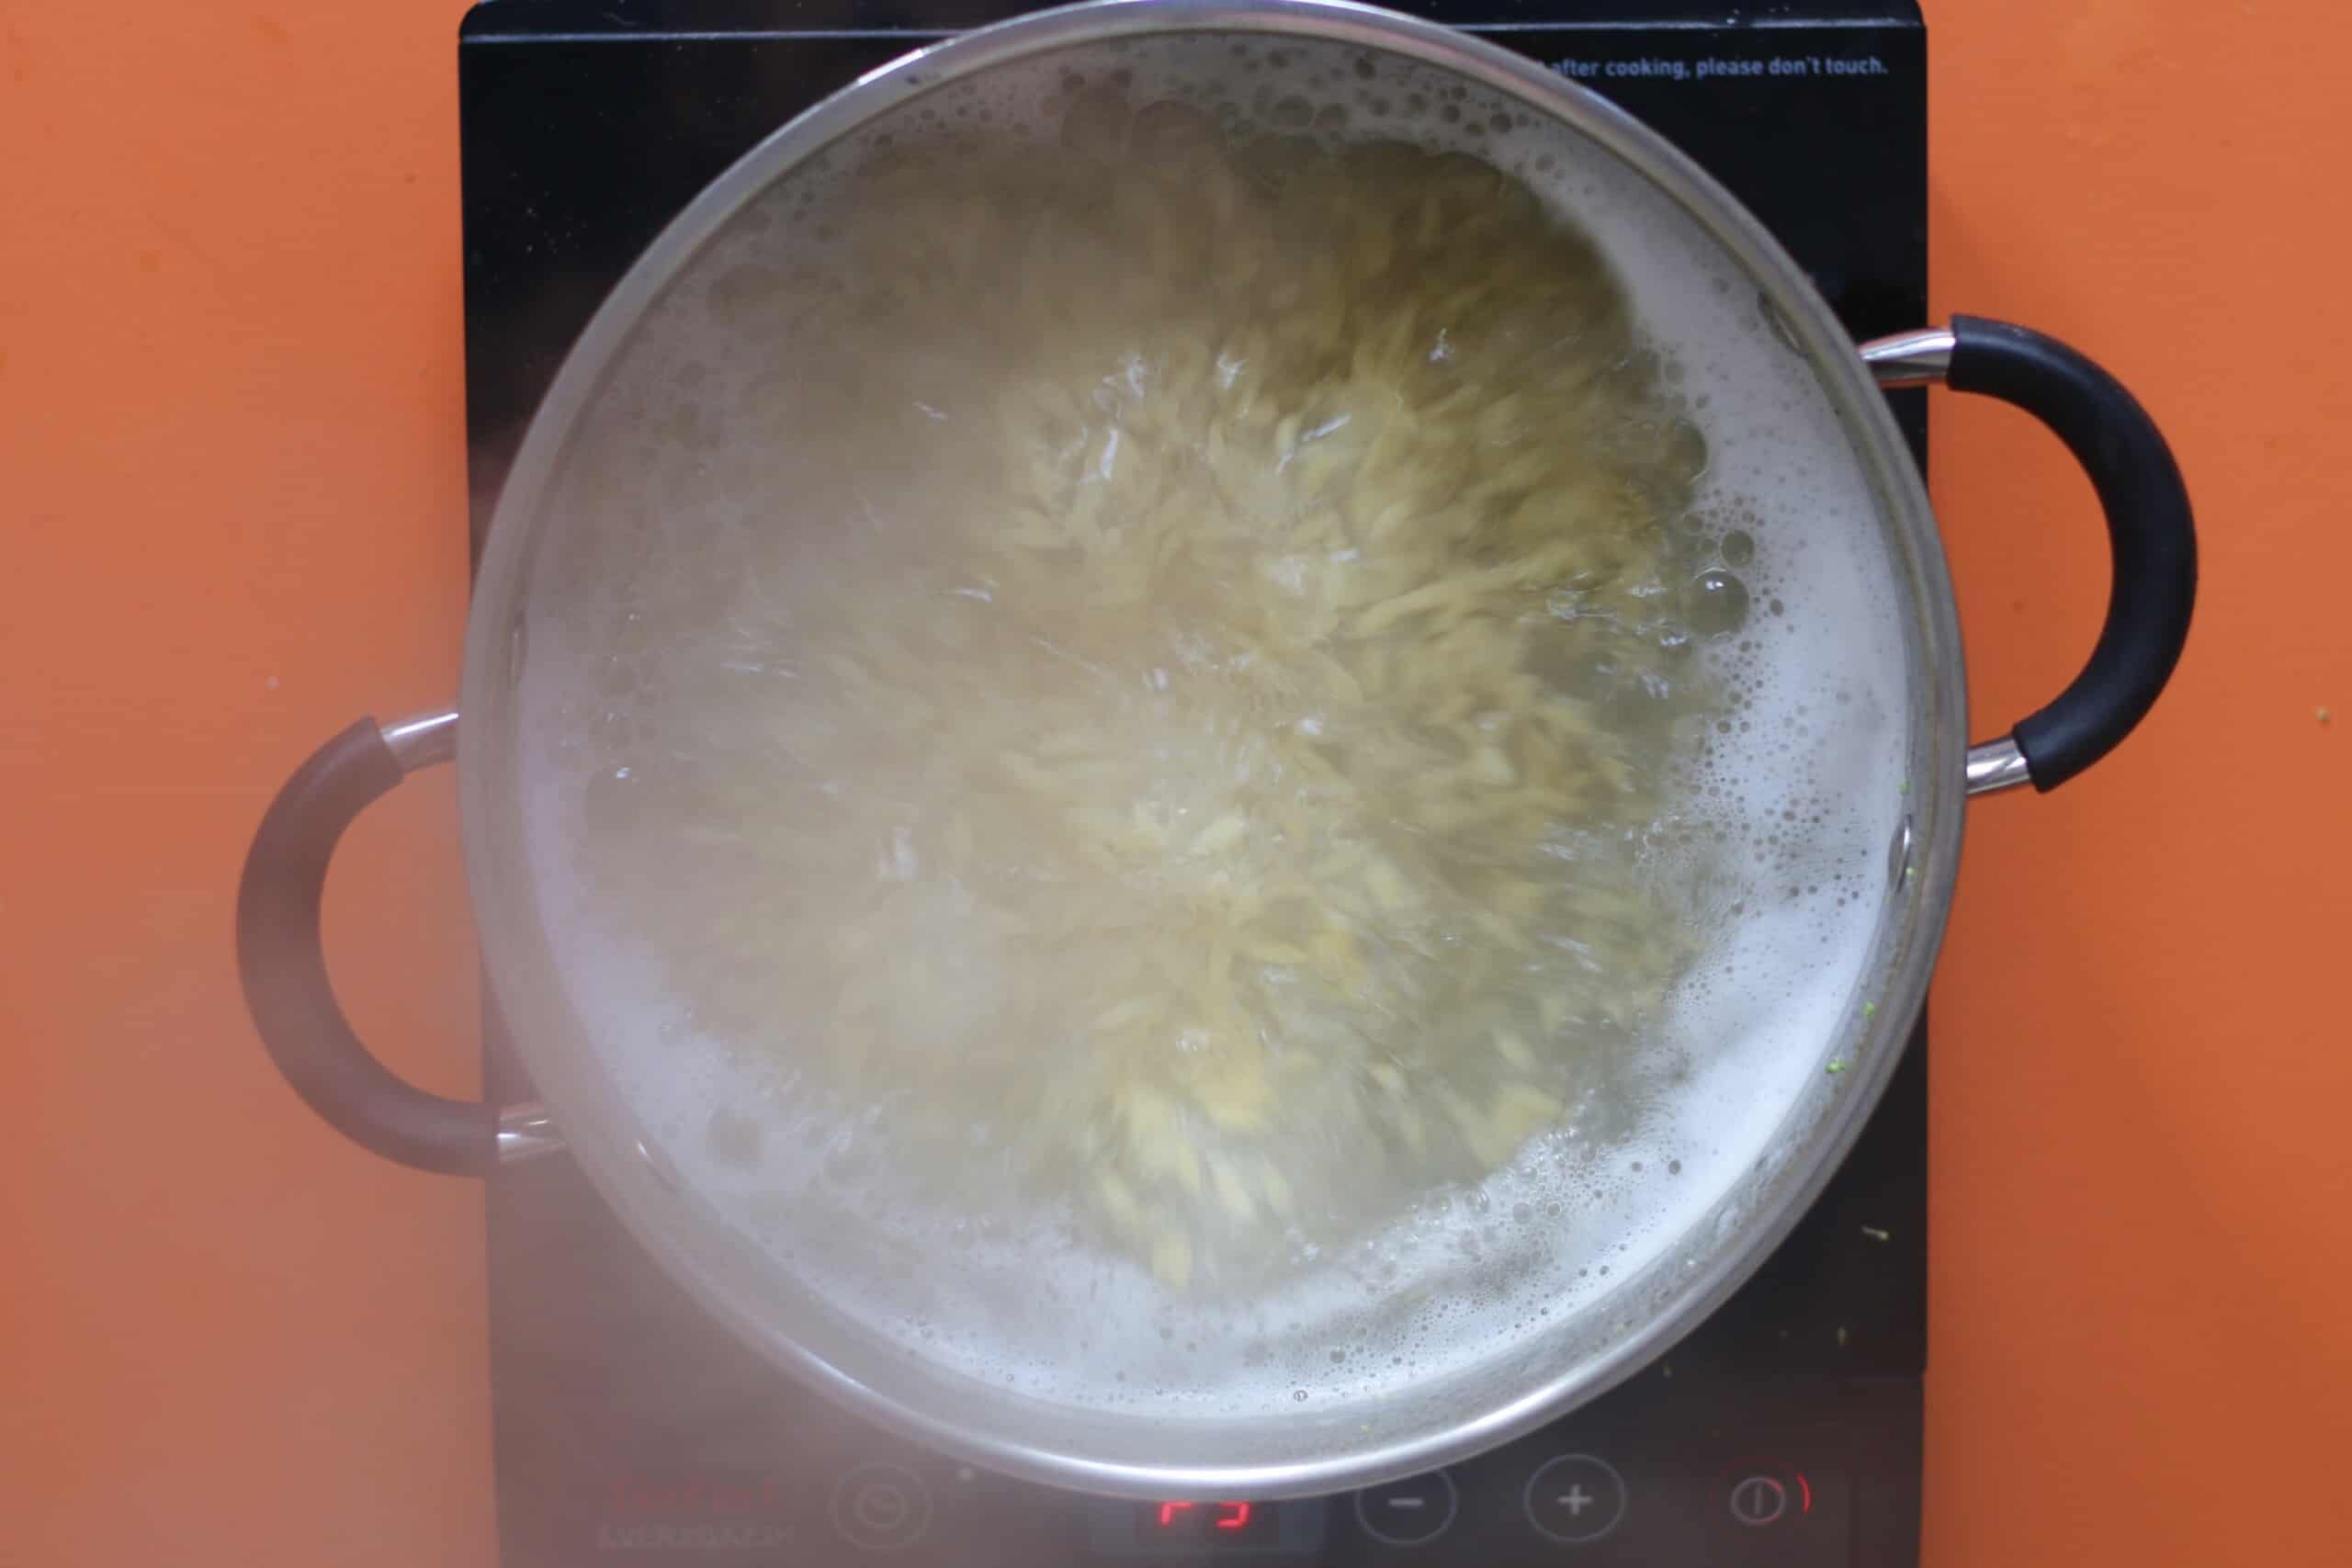 Orzo in saucepan with boiling water on cooker.